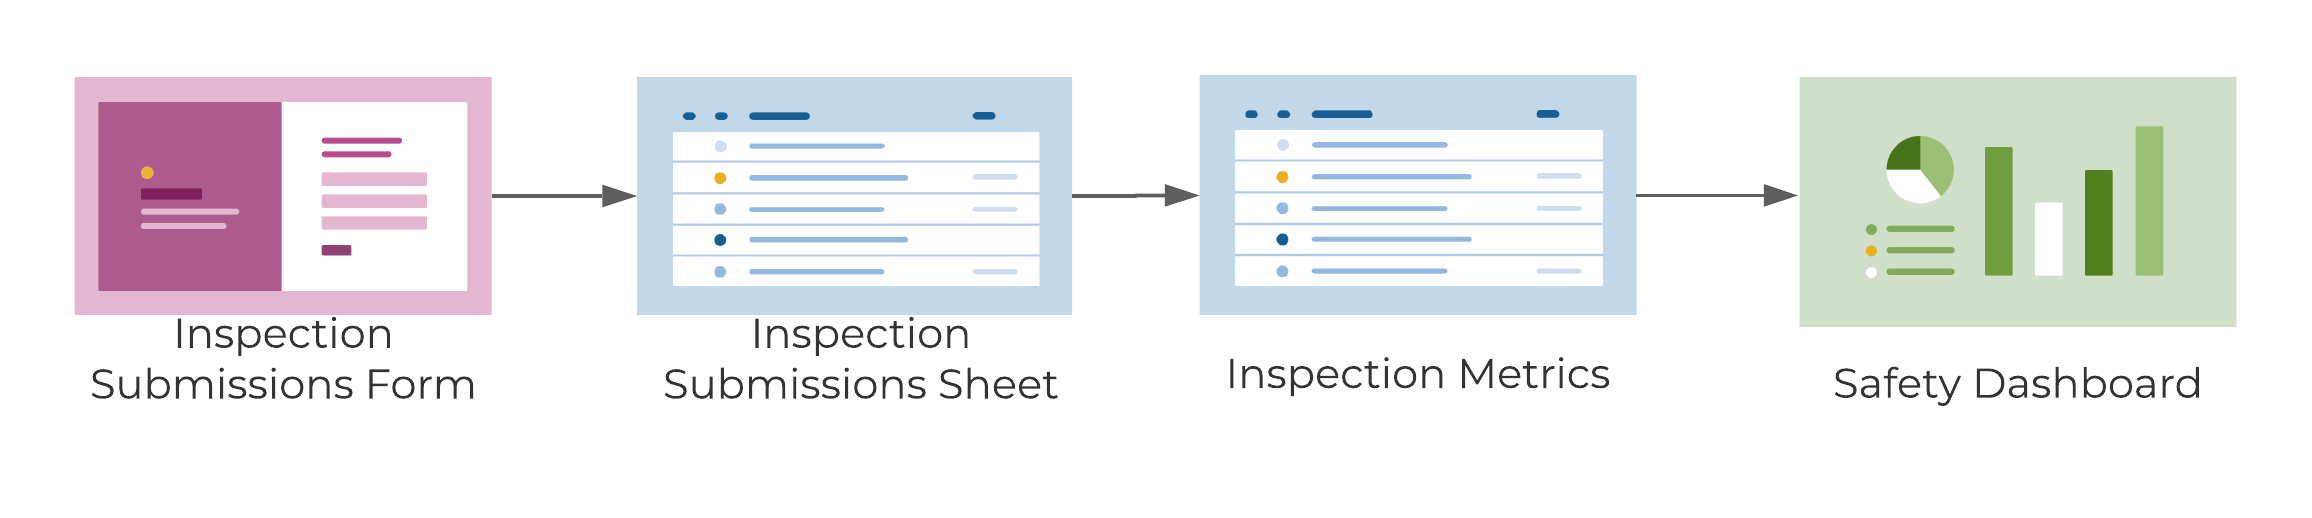 Template Set Flow Chart - Inspection Tracking